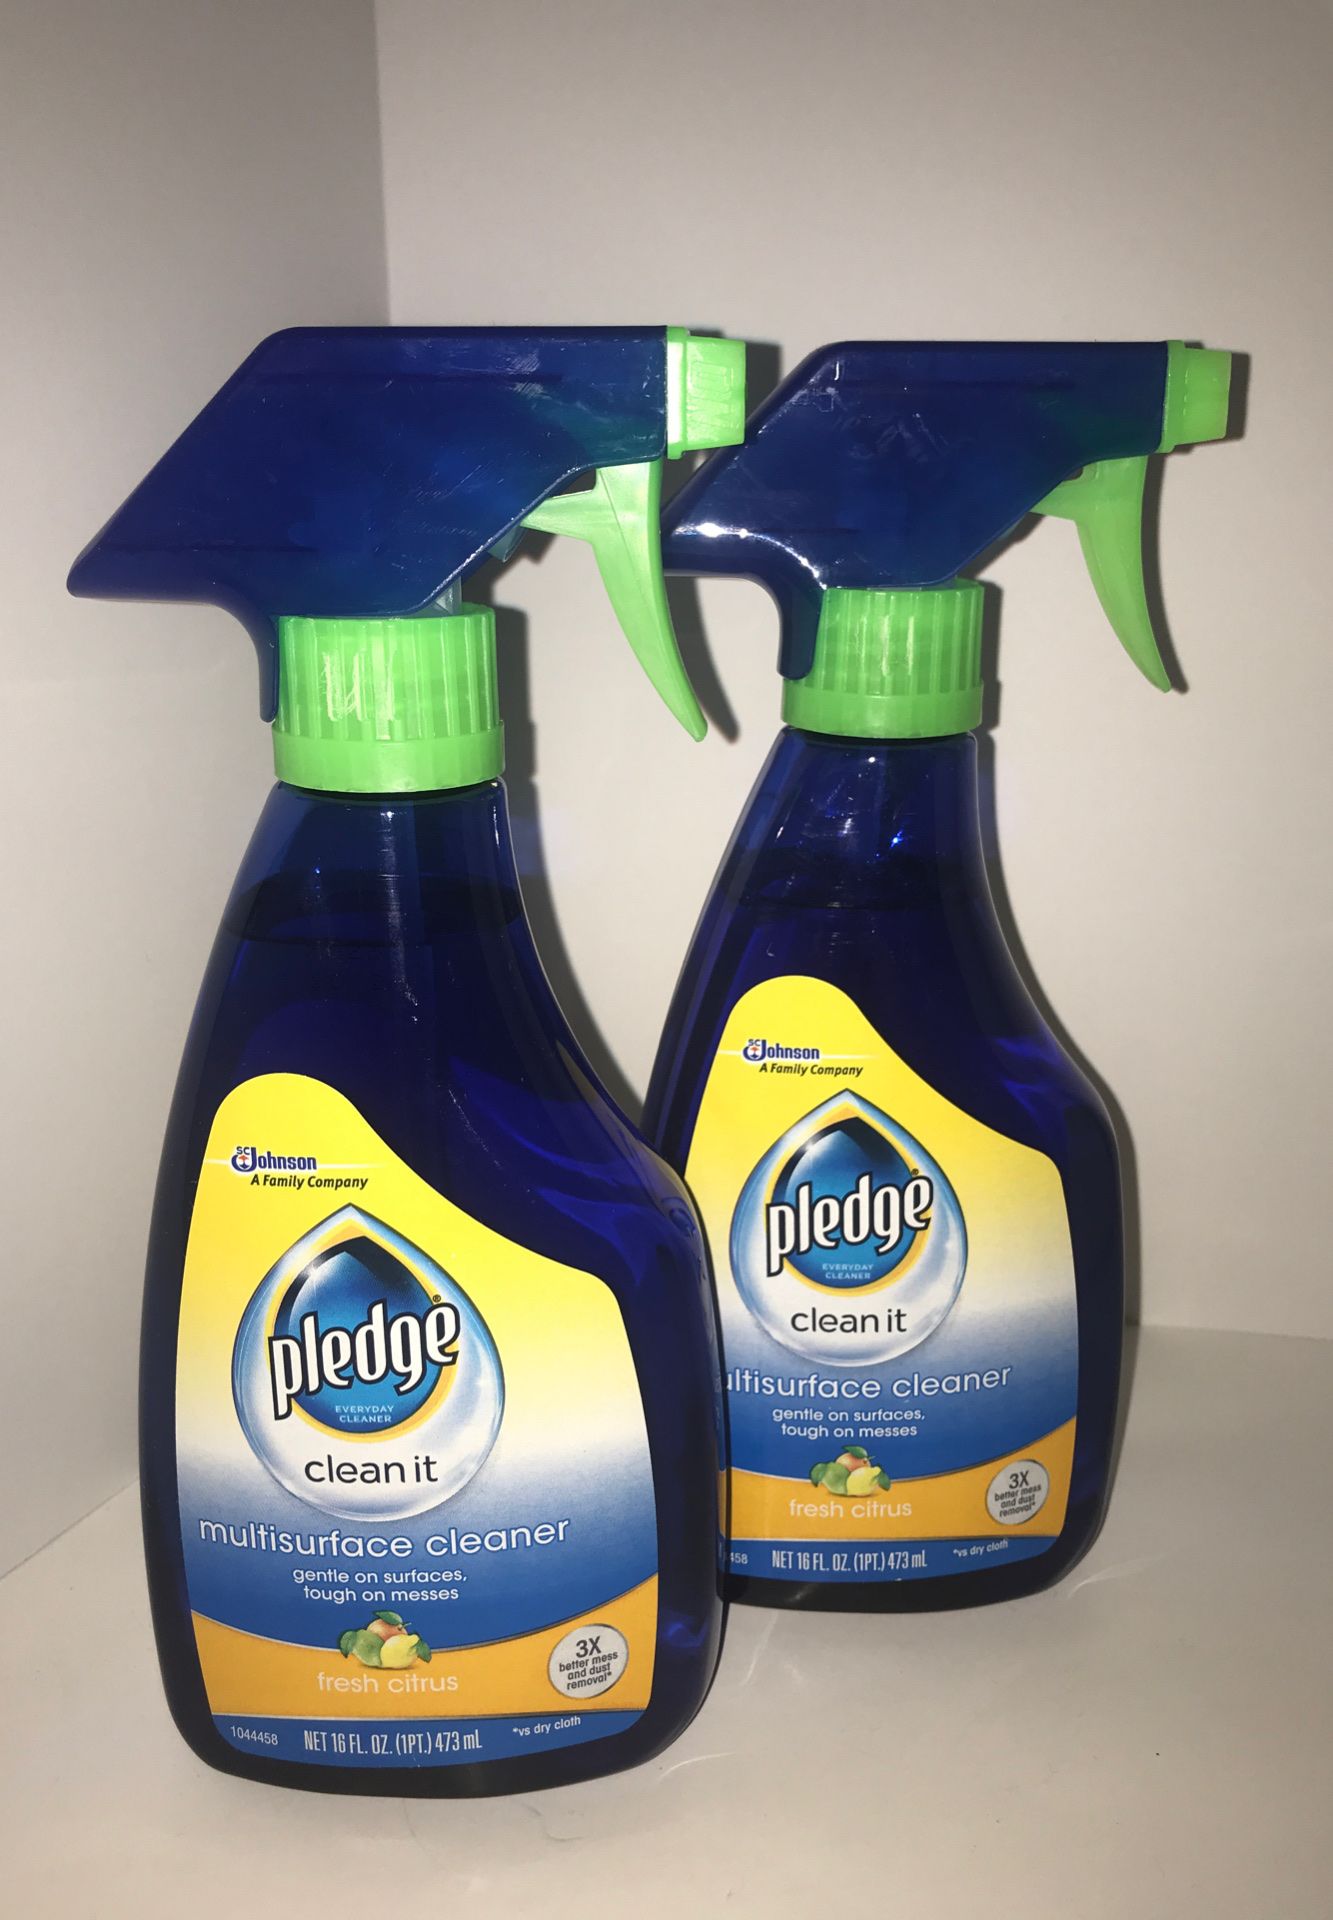 x2 Pledge Multi-Surface spray cleaners